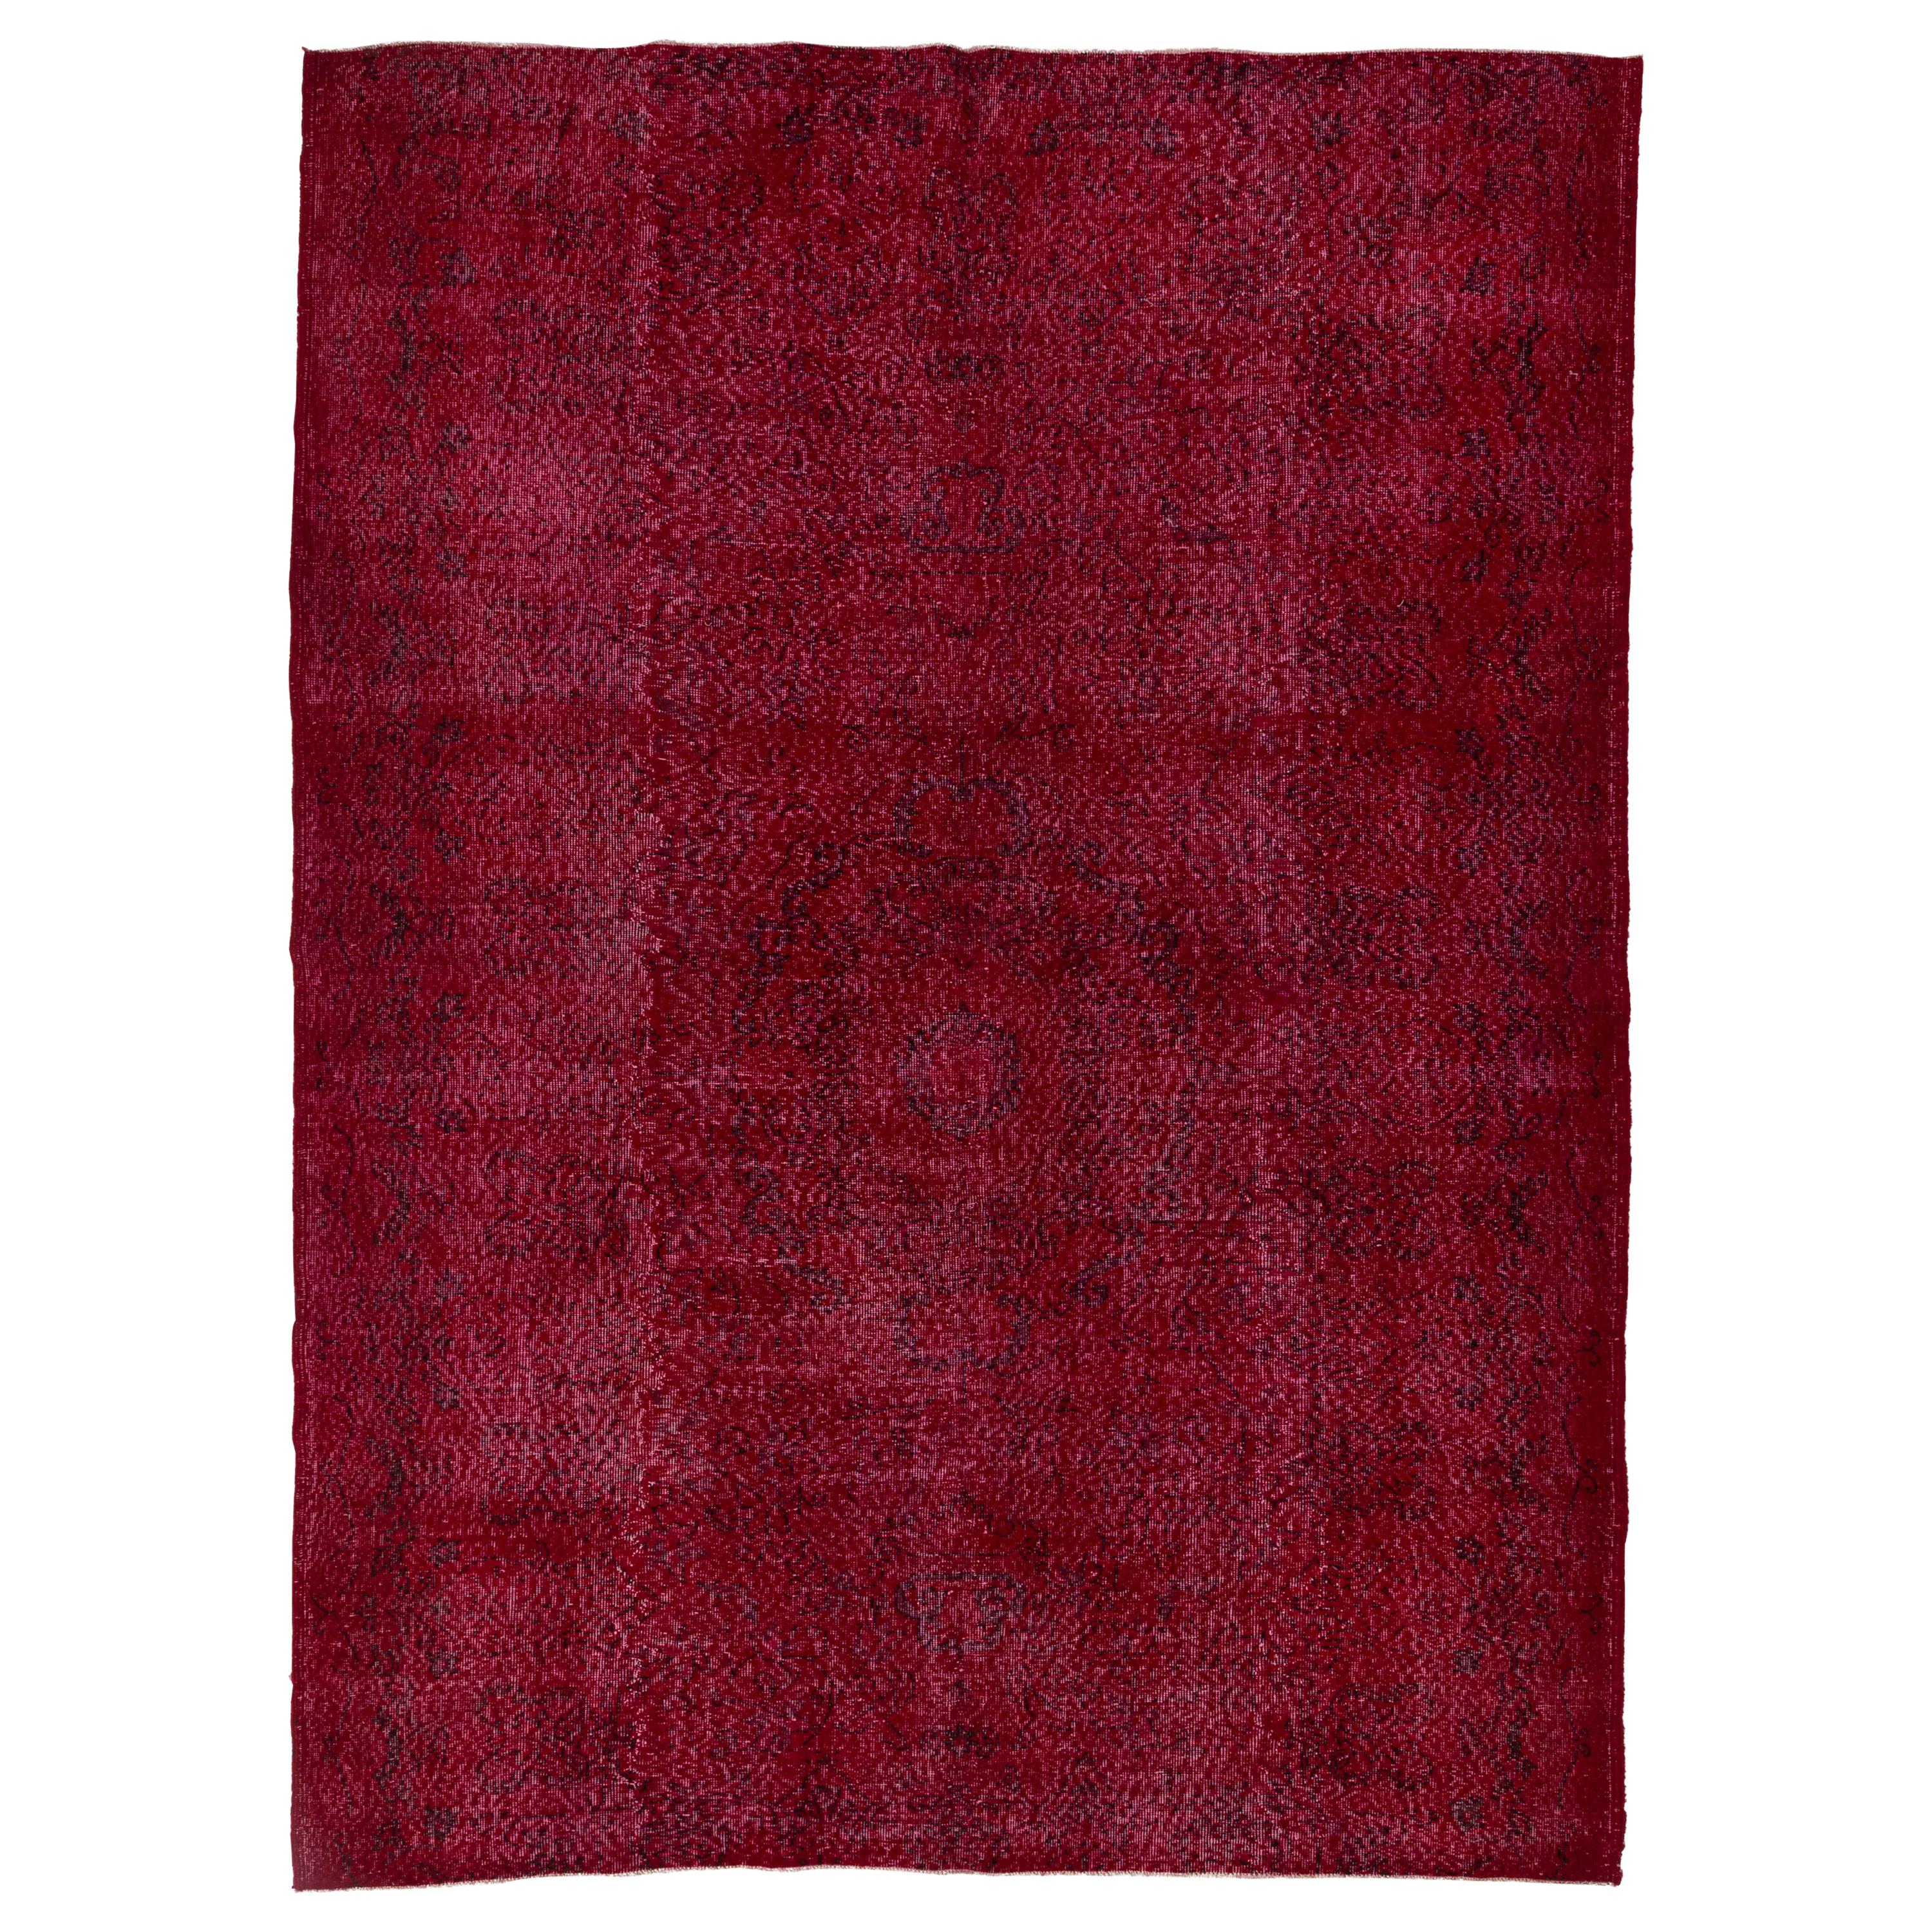 7.4x10 ft Vintage Handmade Wool Turkish Area Rug in Red, Contemporary Carpet